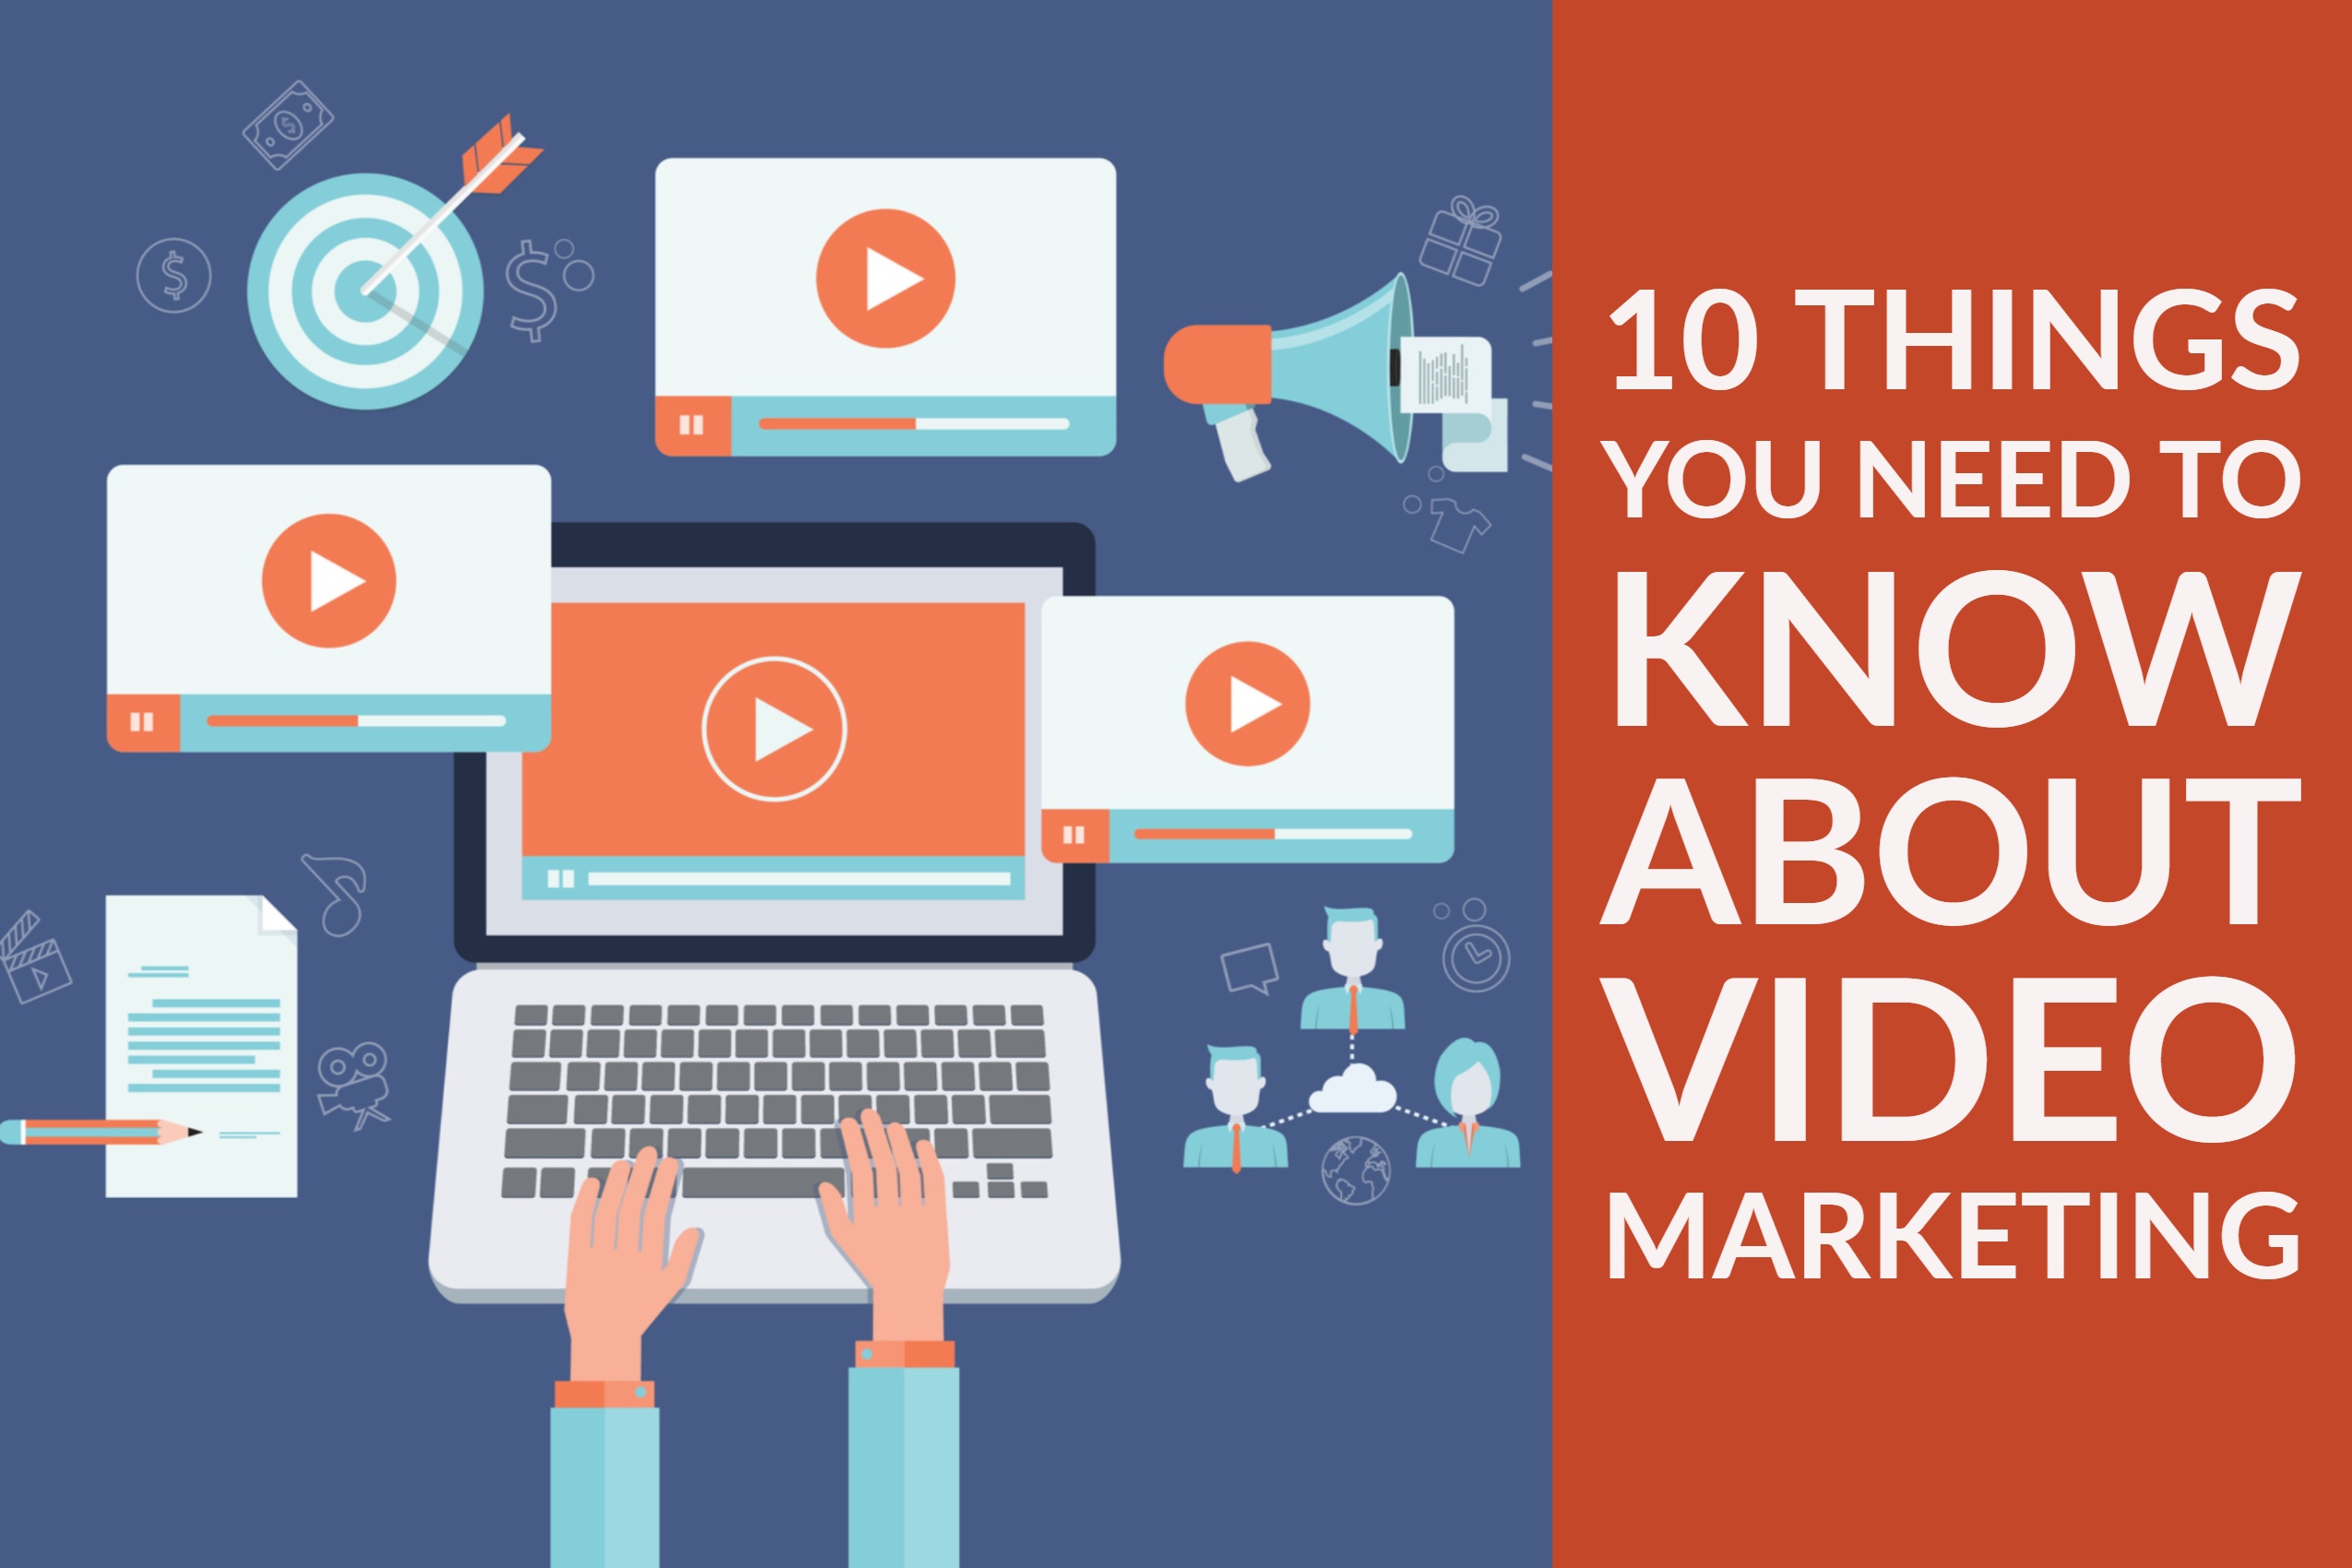 10 Things You Need To Know About Video Marketing